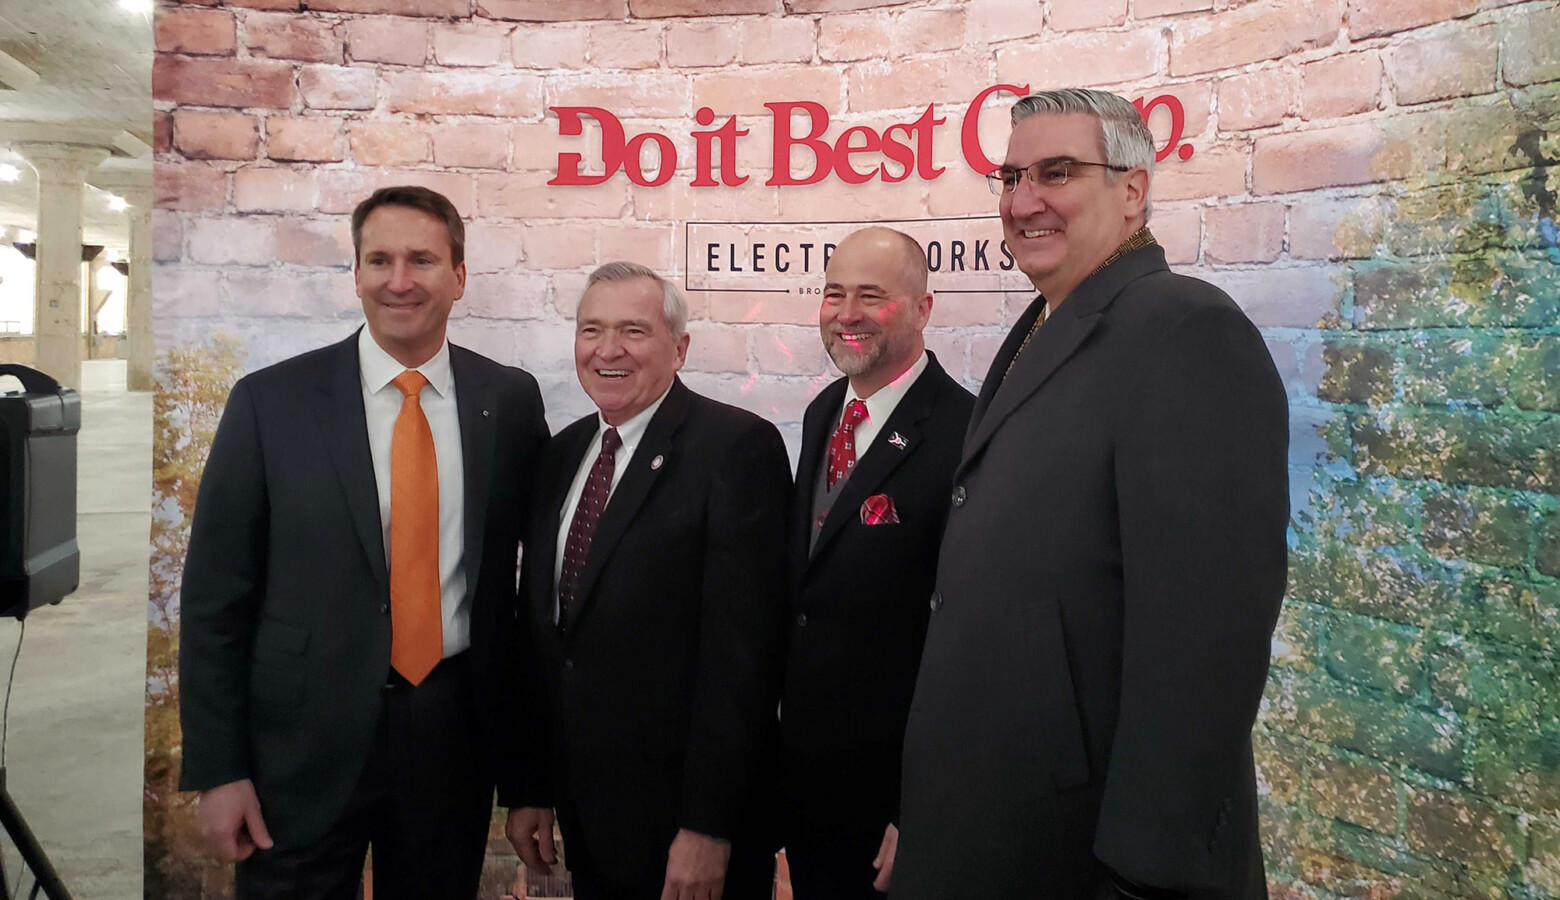 (Left to right) President and CEO Dan Starr, Fort Wayne Mayor Tom Henry, RTM Ventures partner Jeff Kingsbury and Gov. Eric Holcomb pose for a photo following the announcement. (Samantha Horton/IPB News)